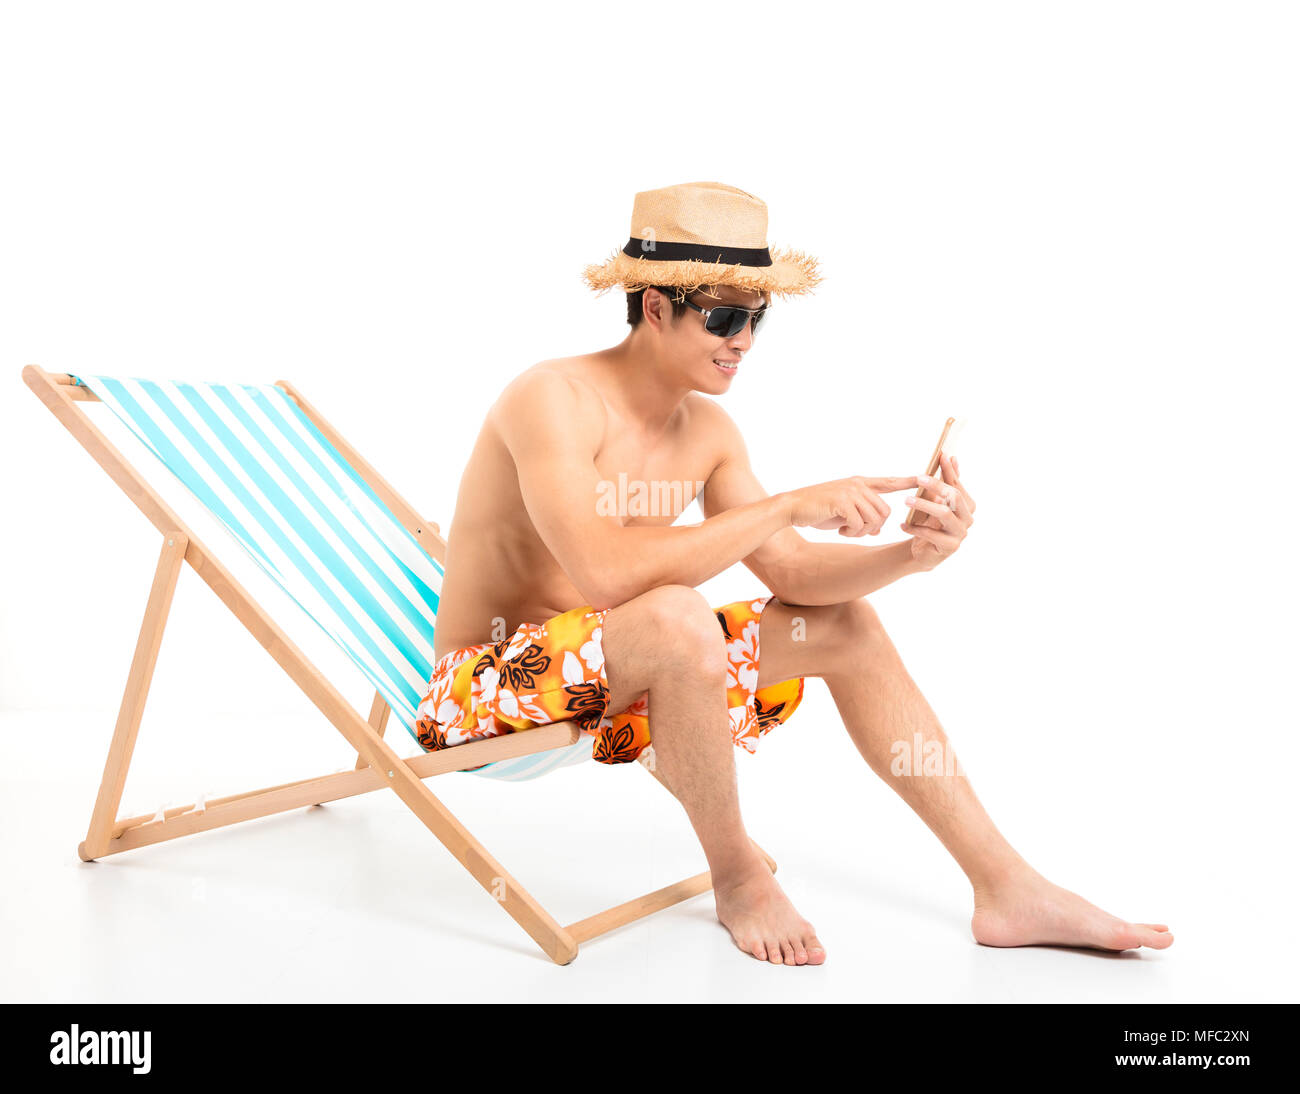 Relaxed man sitting in lounger chair and using the phone Stock Photo